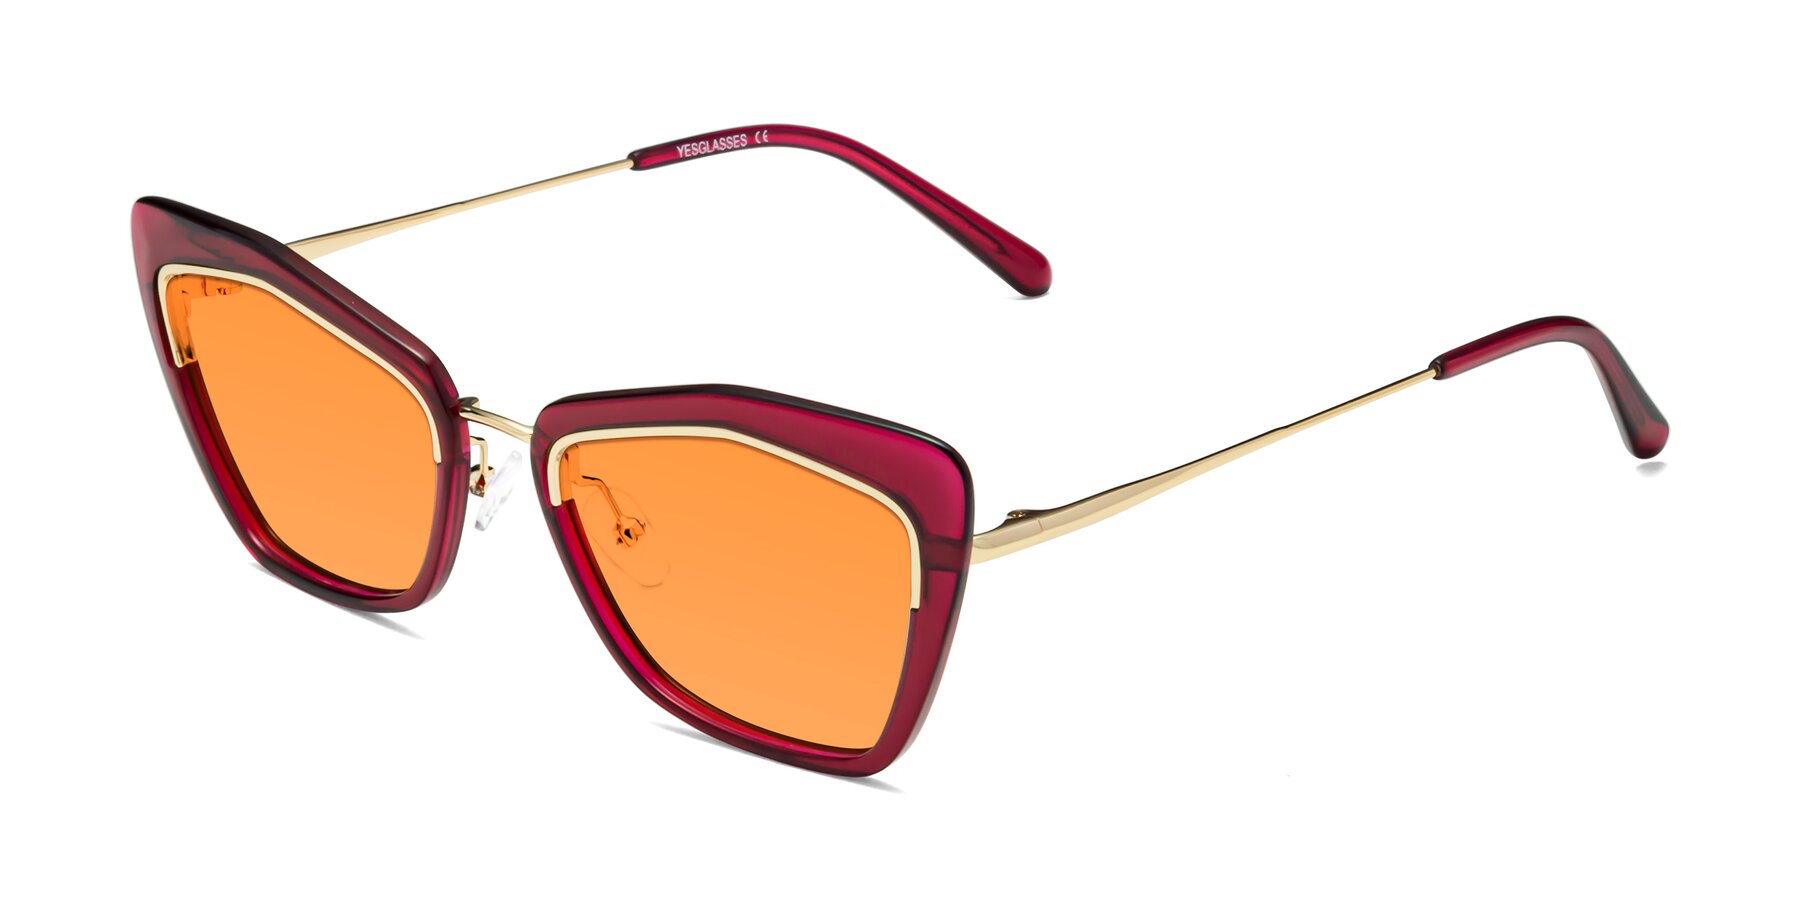 Angle of Lasso in Wine with Orange Tinted Lenses